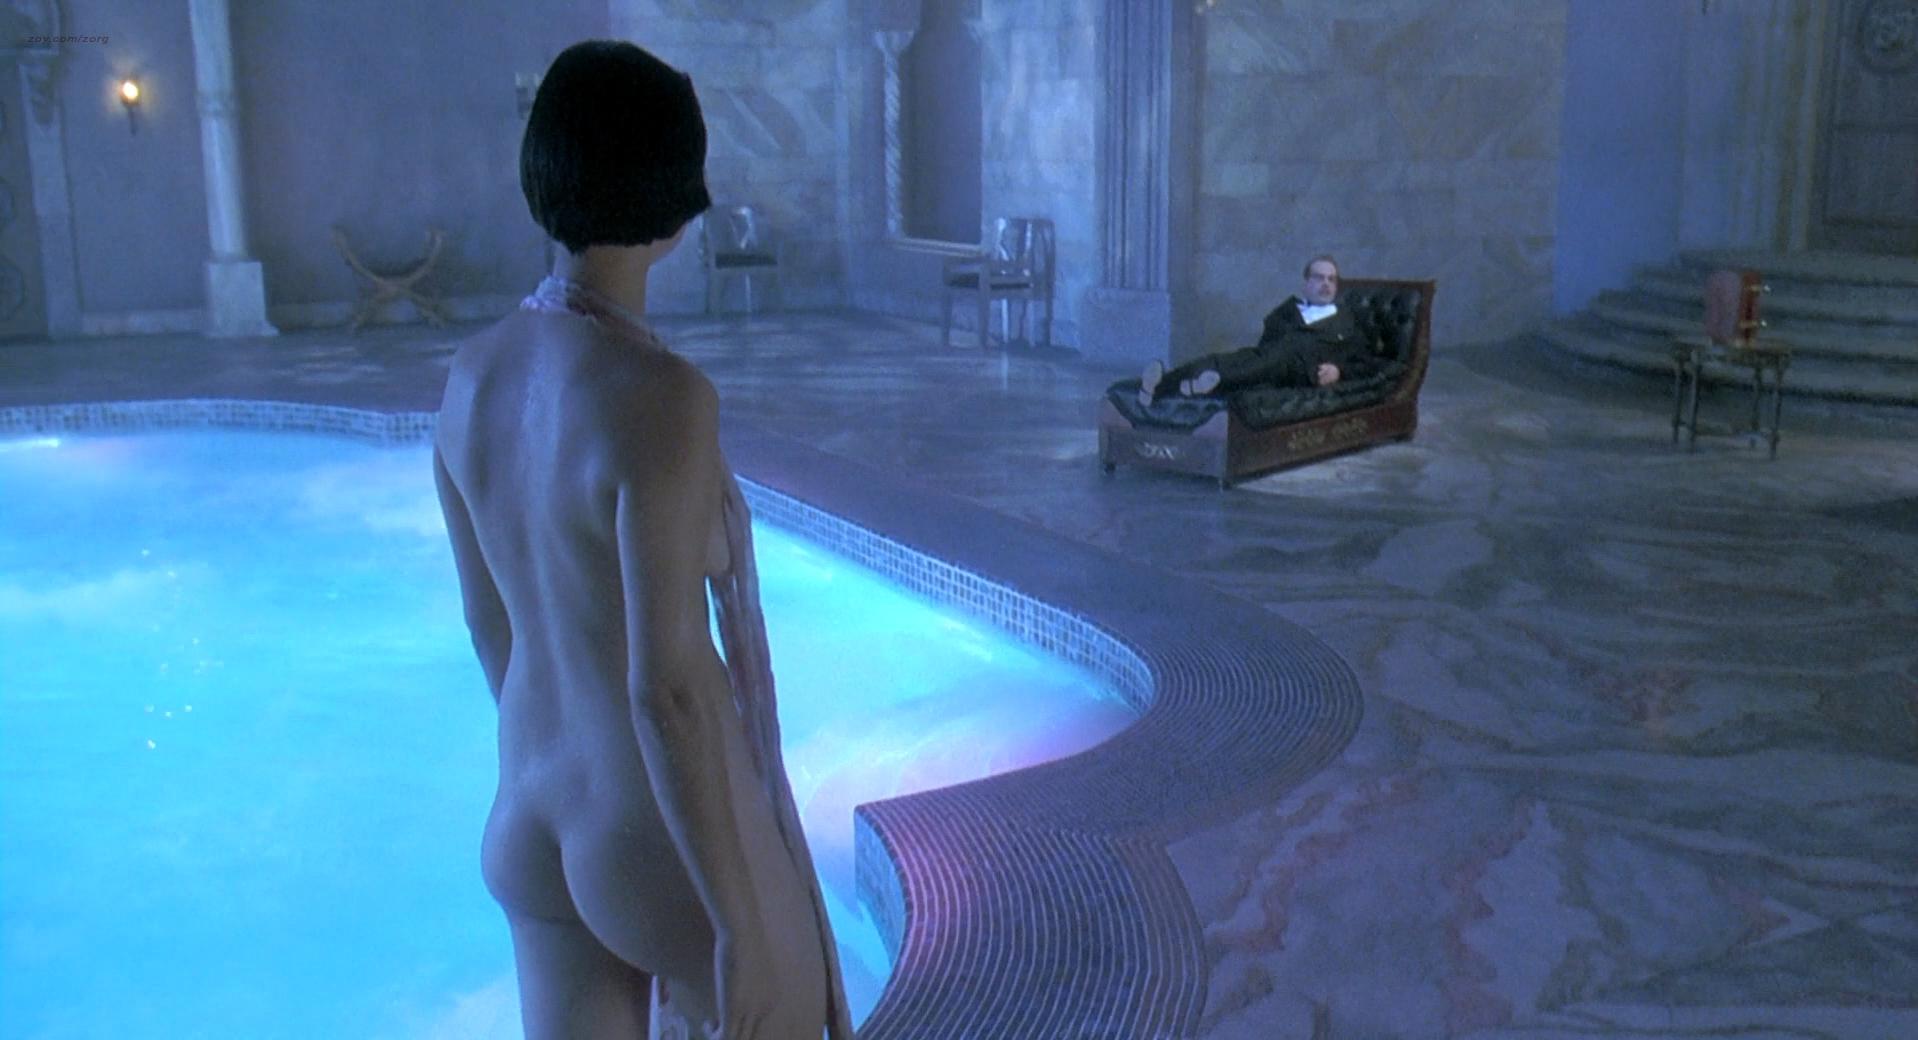 There is not much other real nudity but Isabella Rossellini looks quite... 